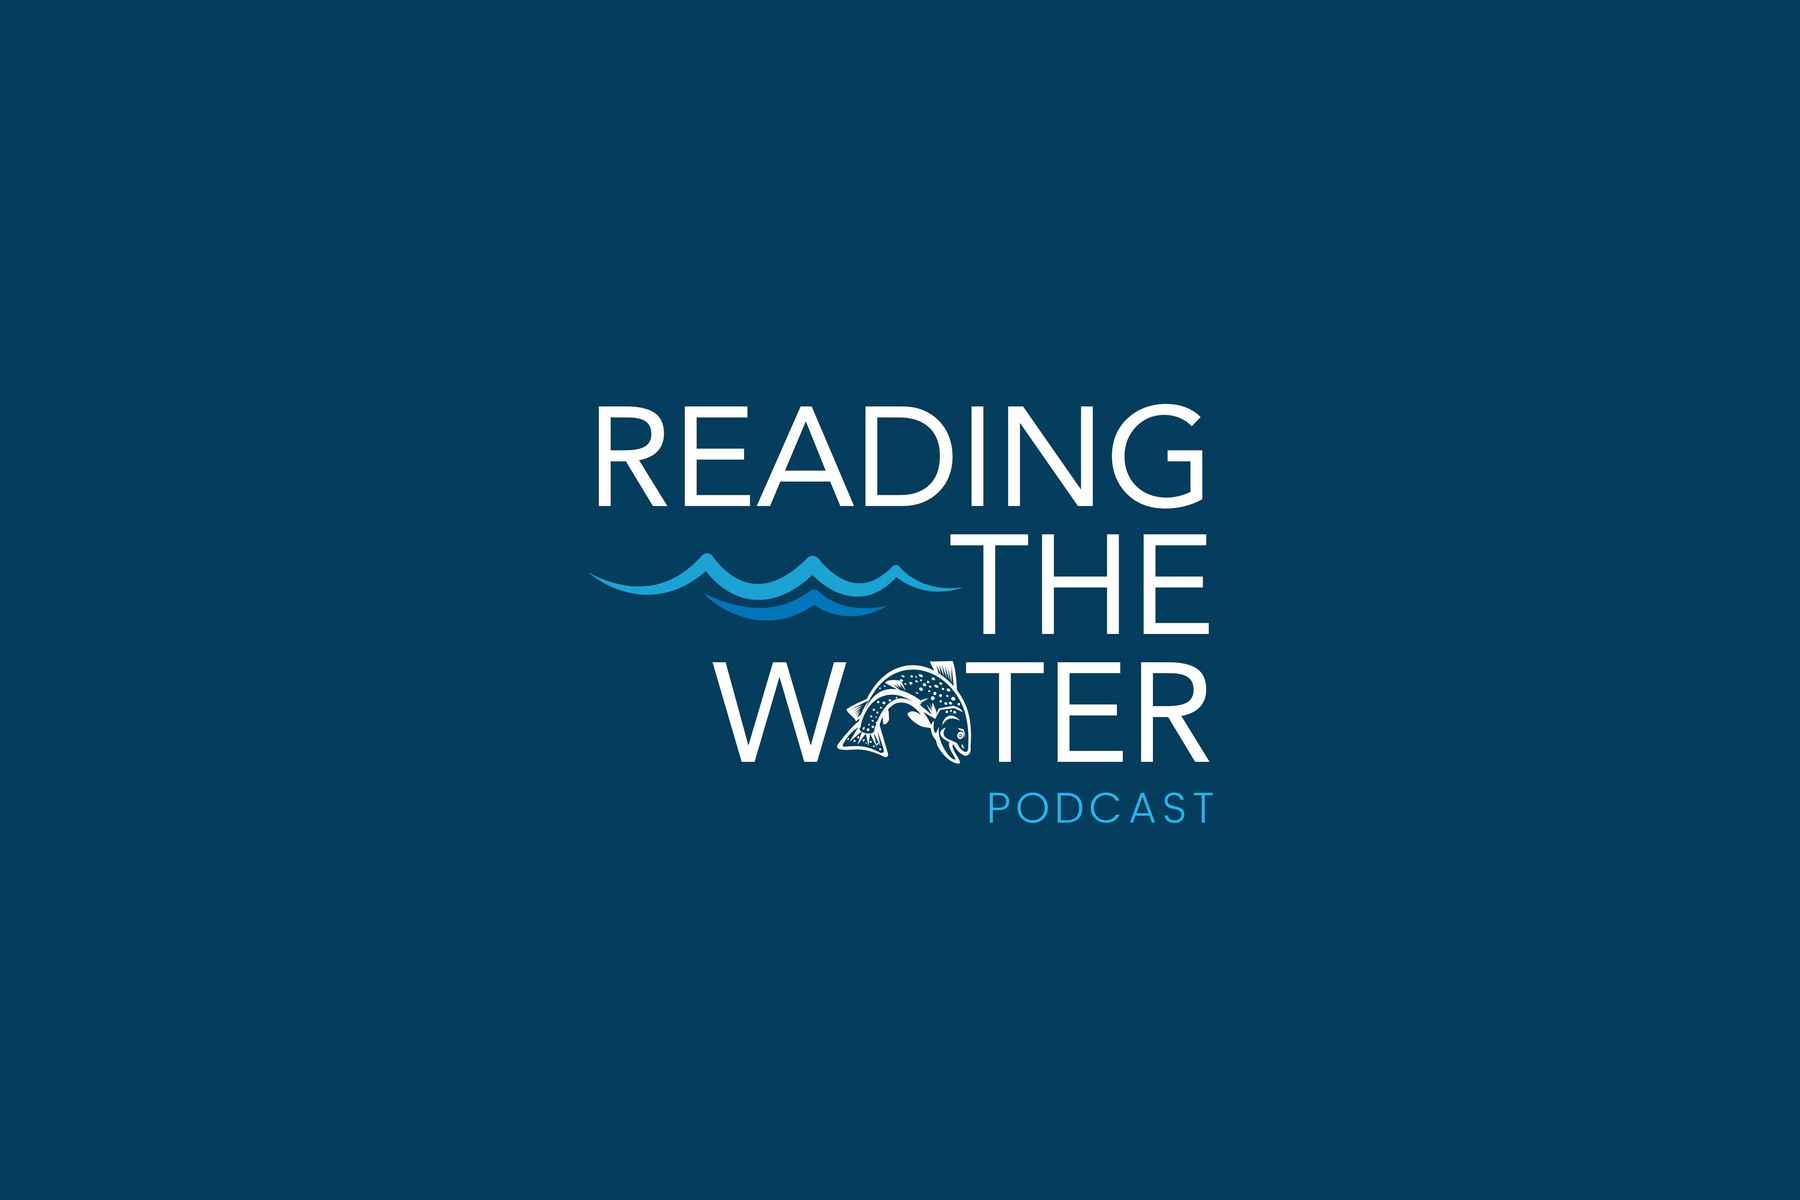 Reading the Water podcast debuts